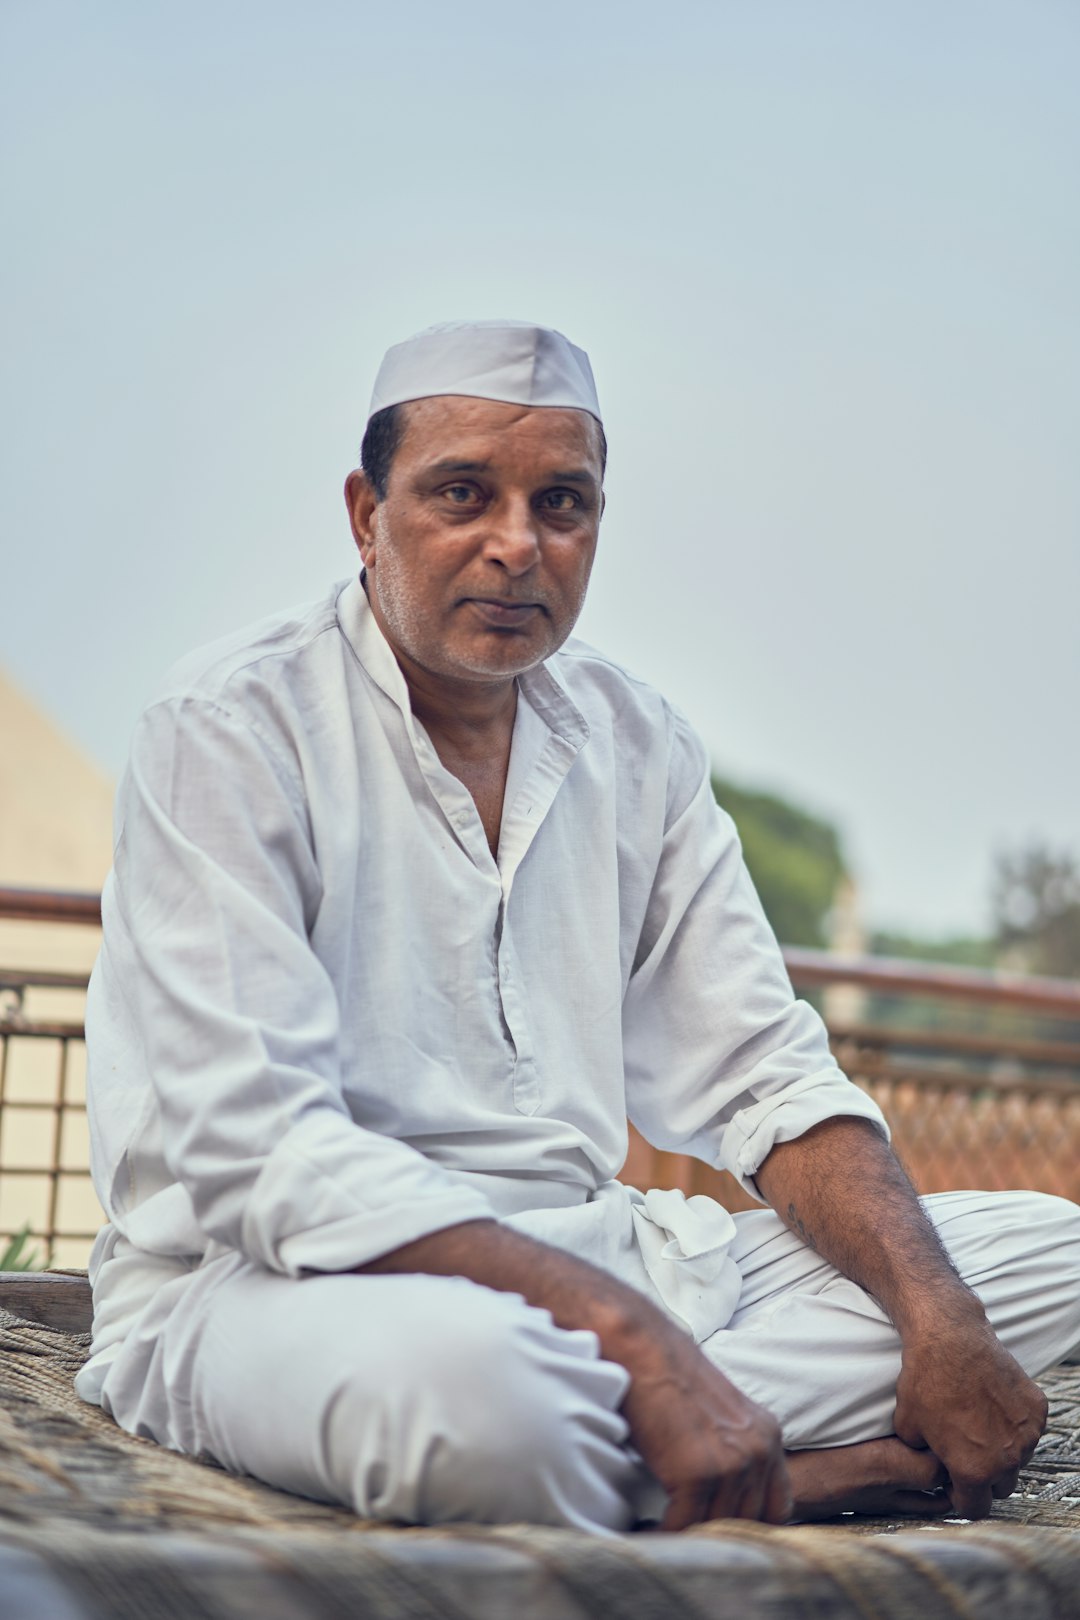 man in white thobe sitting on brown wooden bench during daytime